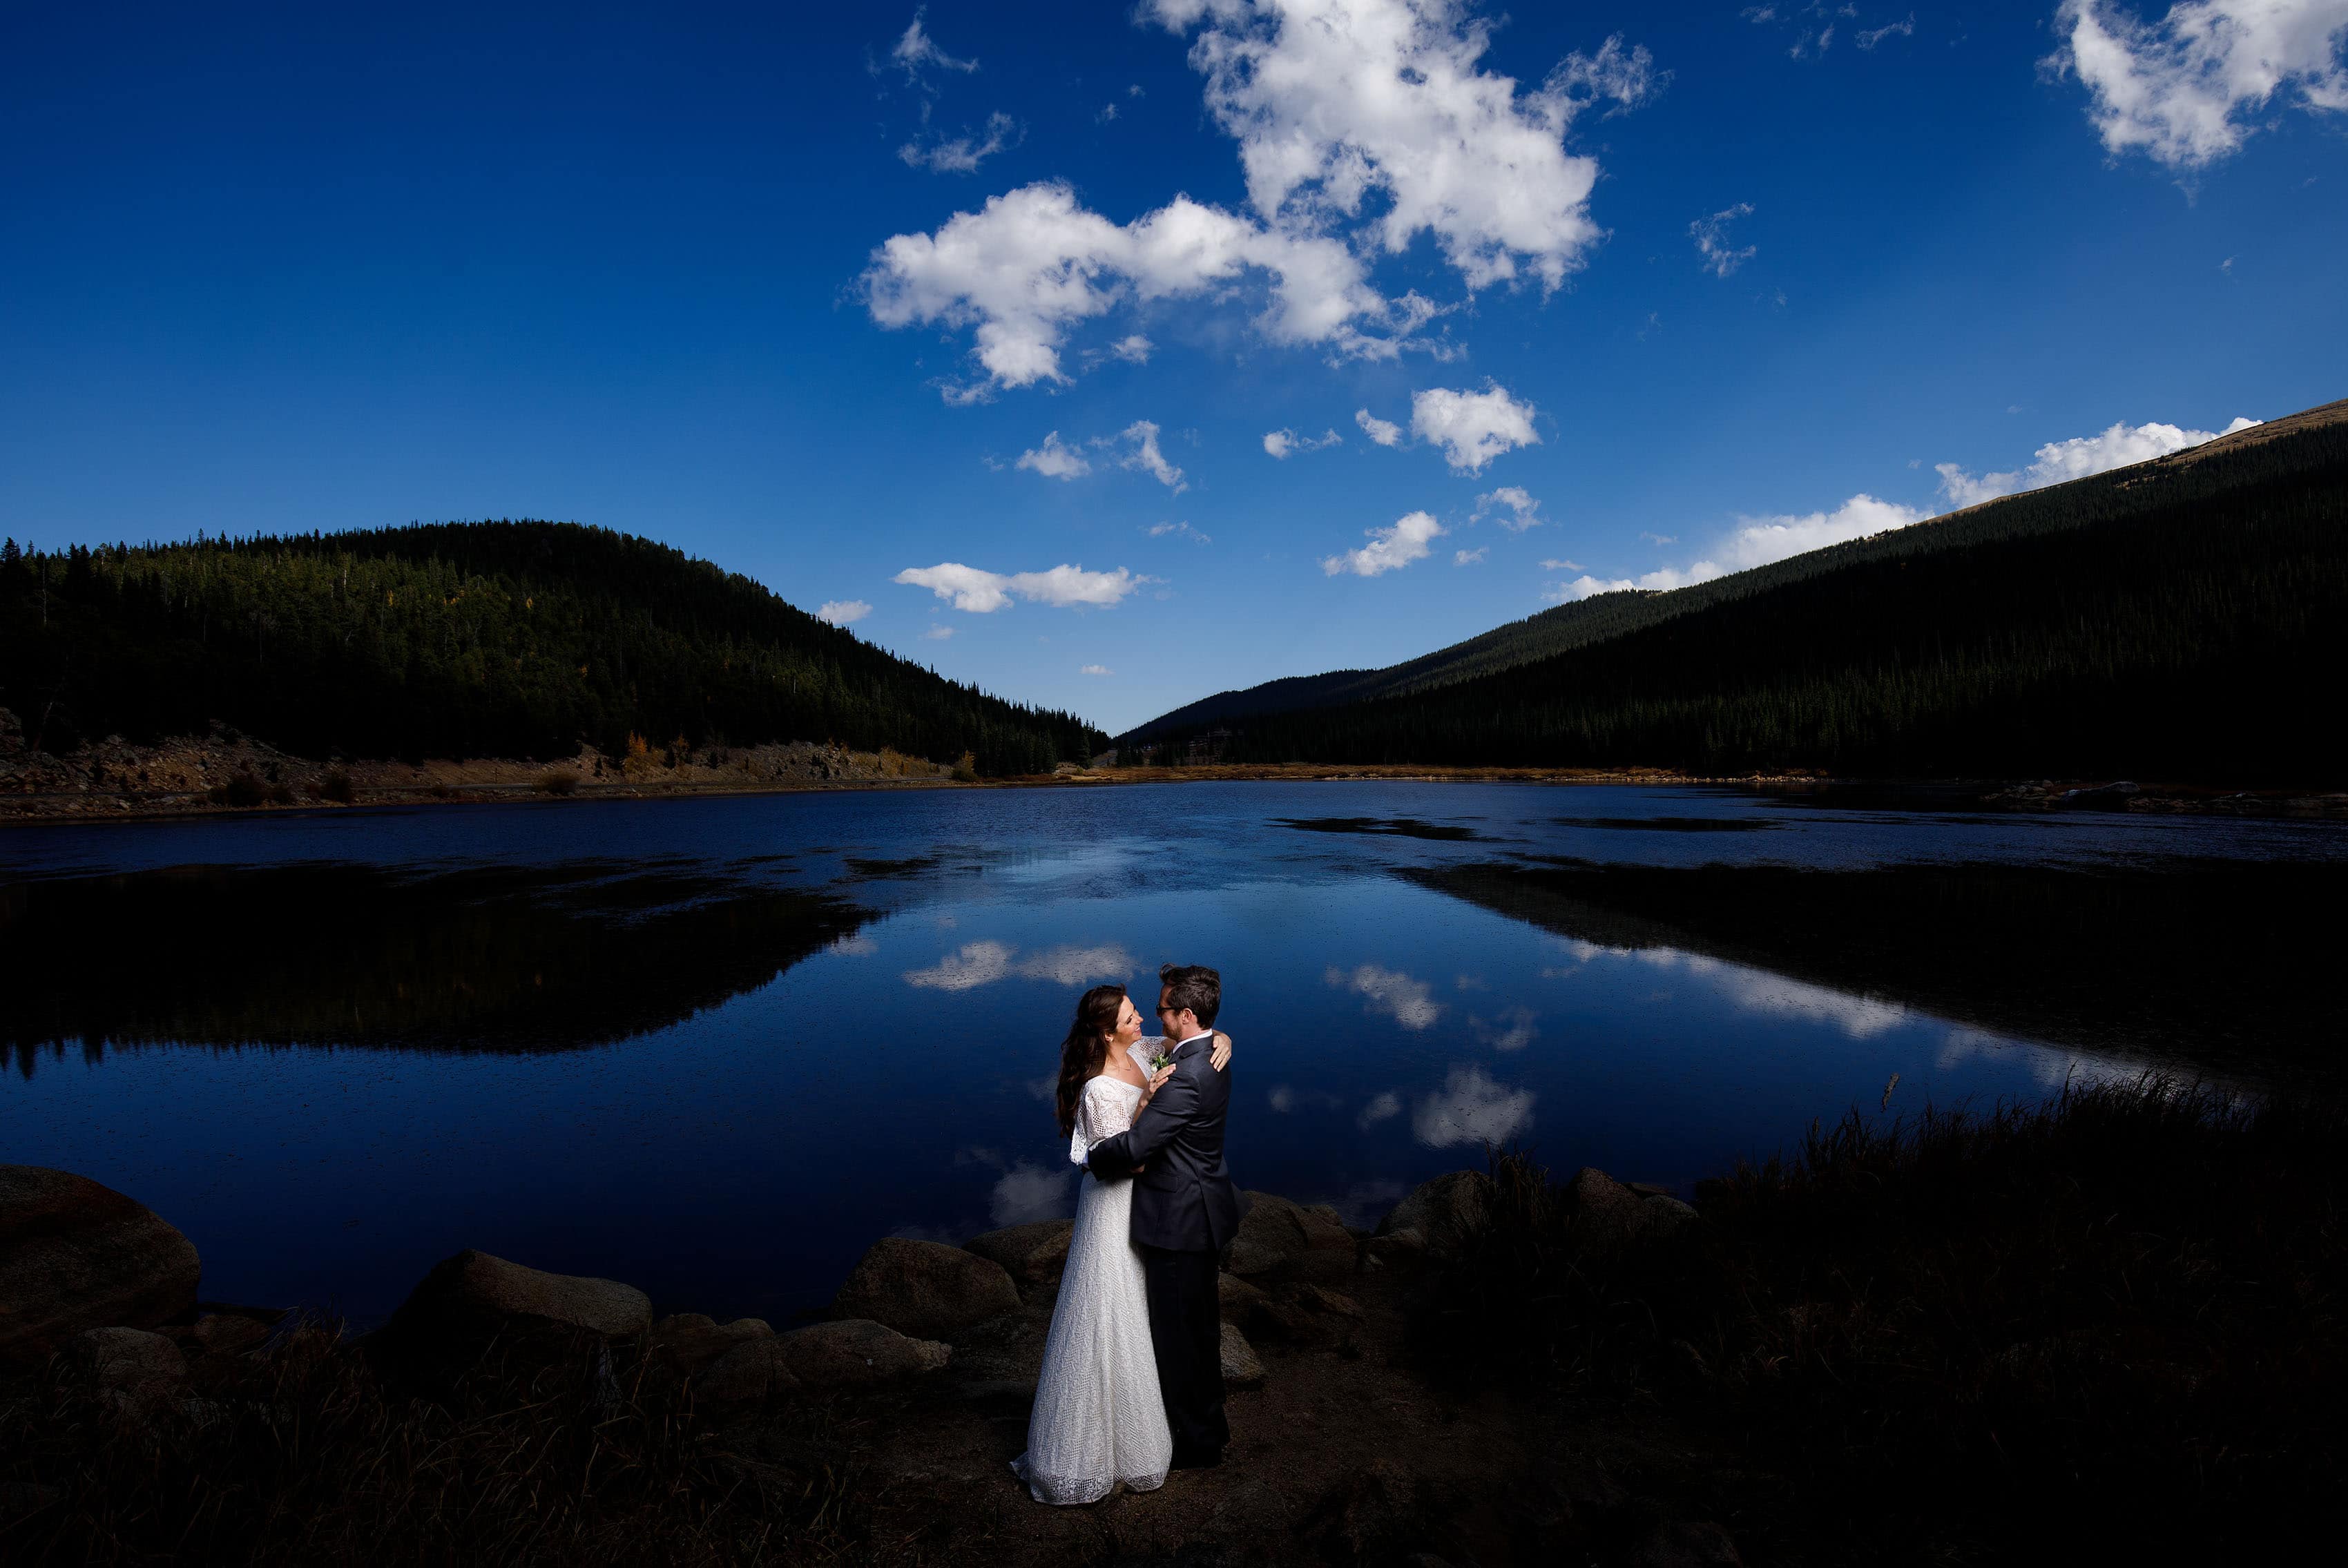 The couple poses at Echo Lake near Mount Evans after their fall Blackstone Rivers Ranch wedding in Idaho Springs Colorado